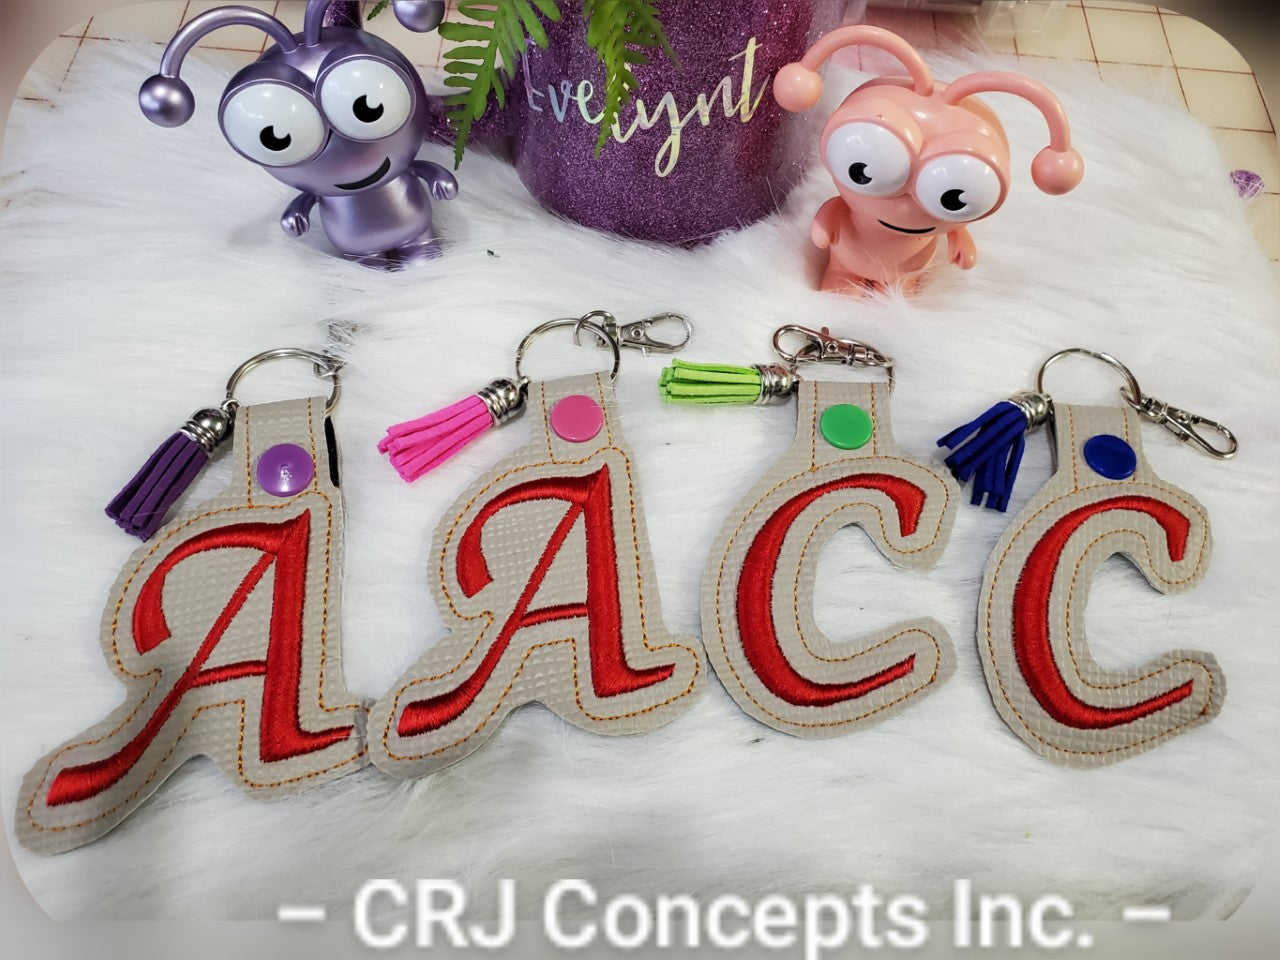 keychain holder Embroidery letters